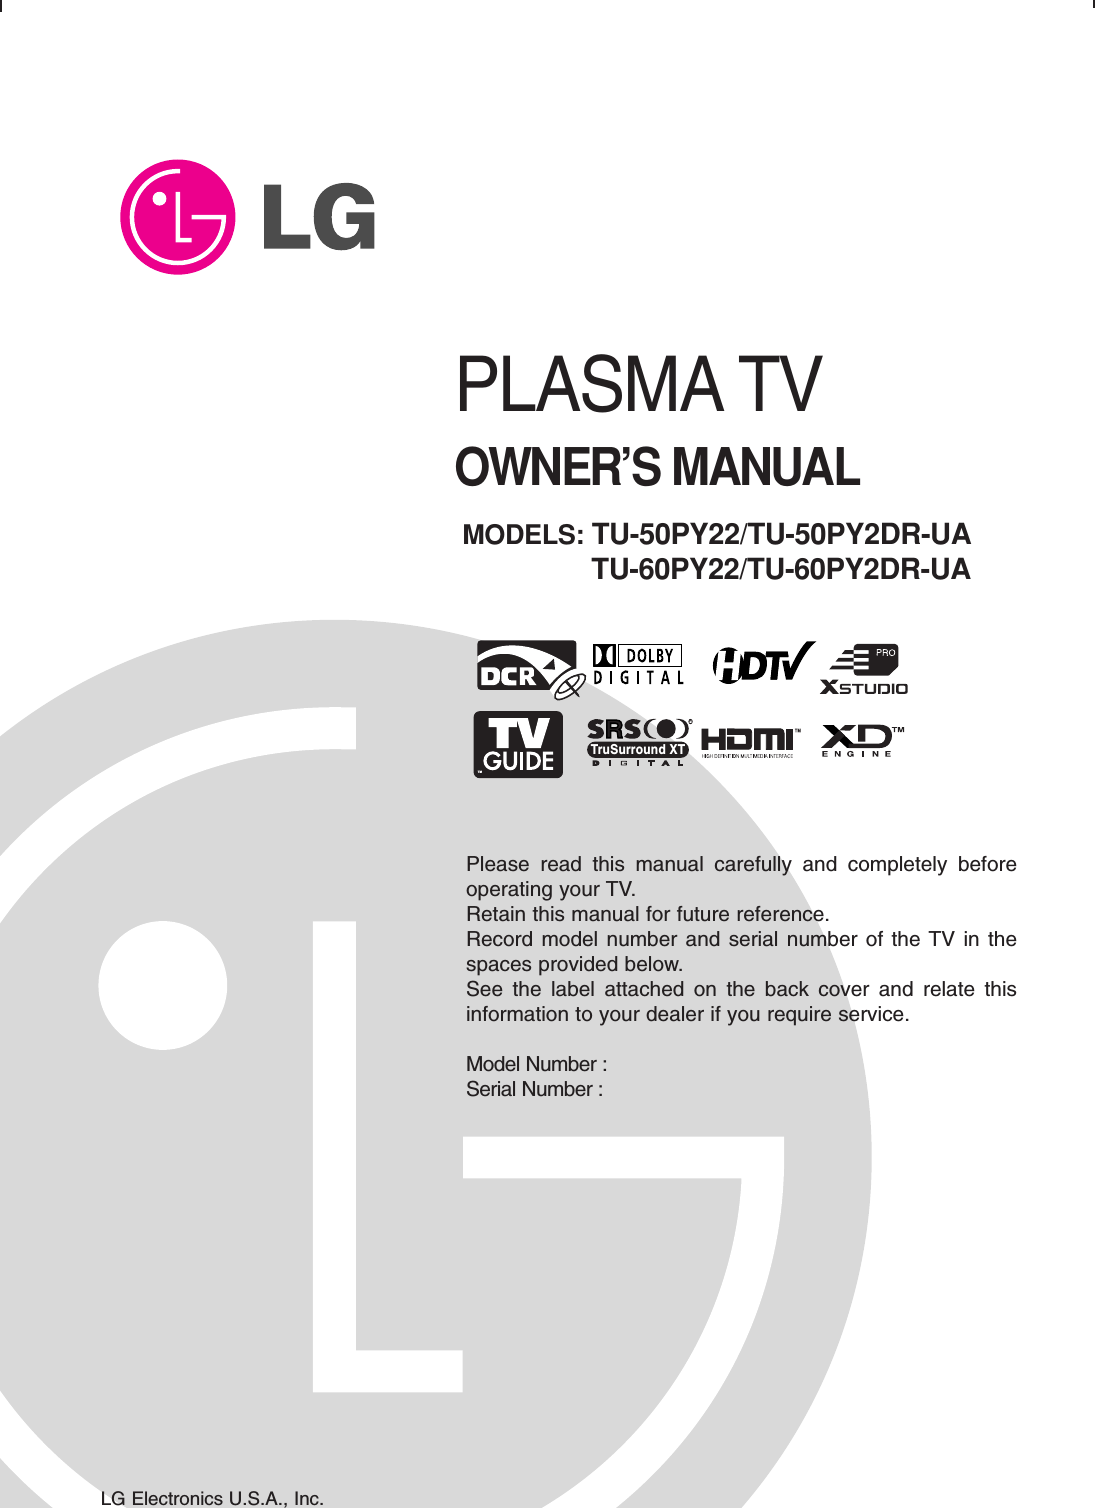 Please read this manual carefully and completely beforeoperating your TV. Retain this manual for future reference.Record model number and serial number of the TV in thespaces provided below. See the label attached on the back cover and relate thisinformation to your dealer if you require service.Model Number : Serial Number : MODELS: TU-50PY22/TU-50PY2DR-UATU-60PY22/TU-60PY2DR-UALG Electronics U.S.A., Inc.TMRTruSurround XTPLASMA TVOWNER’S MANUAL